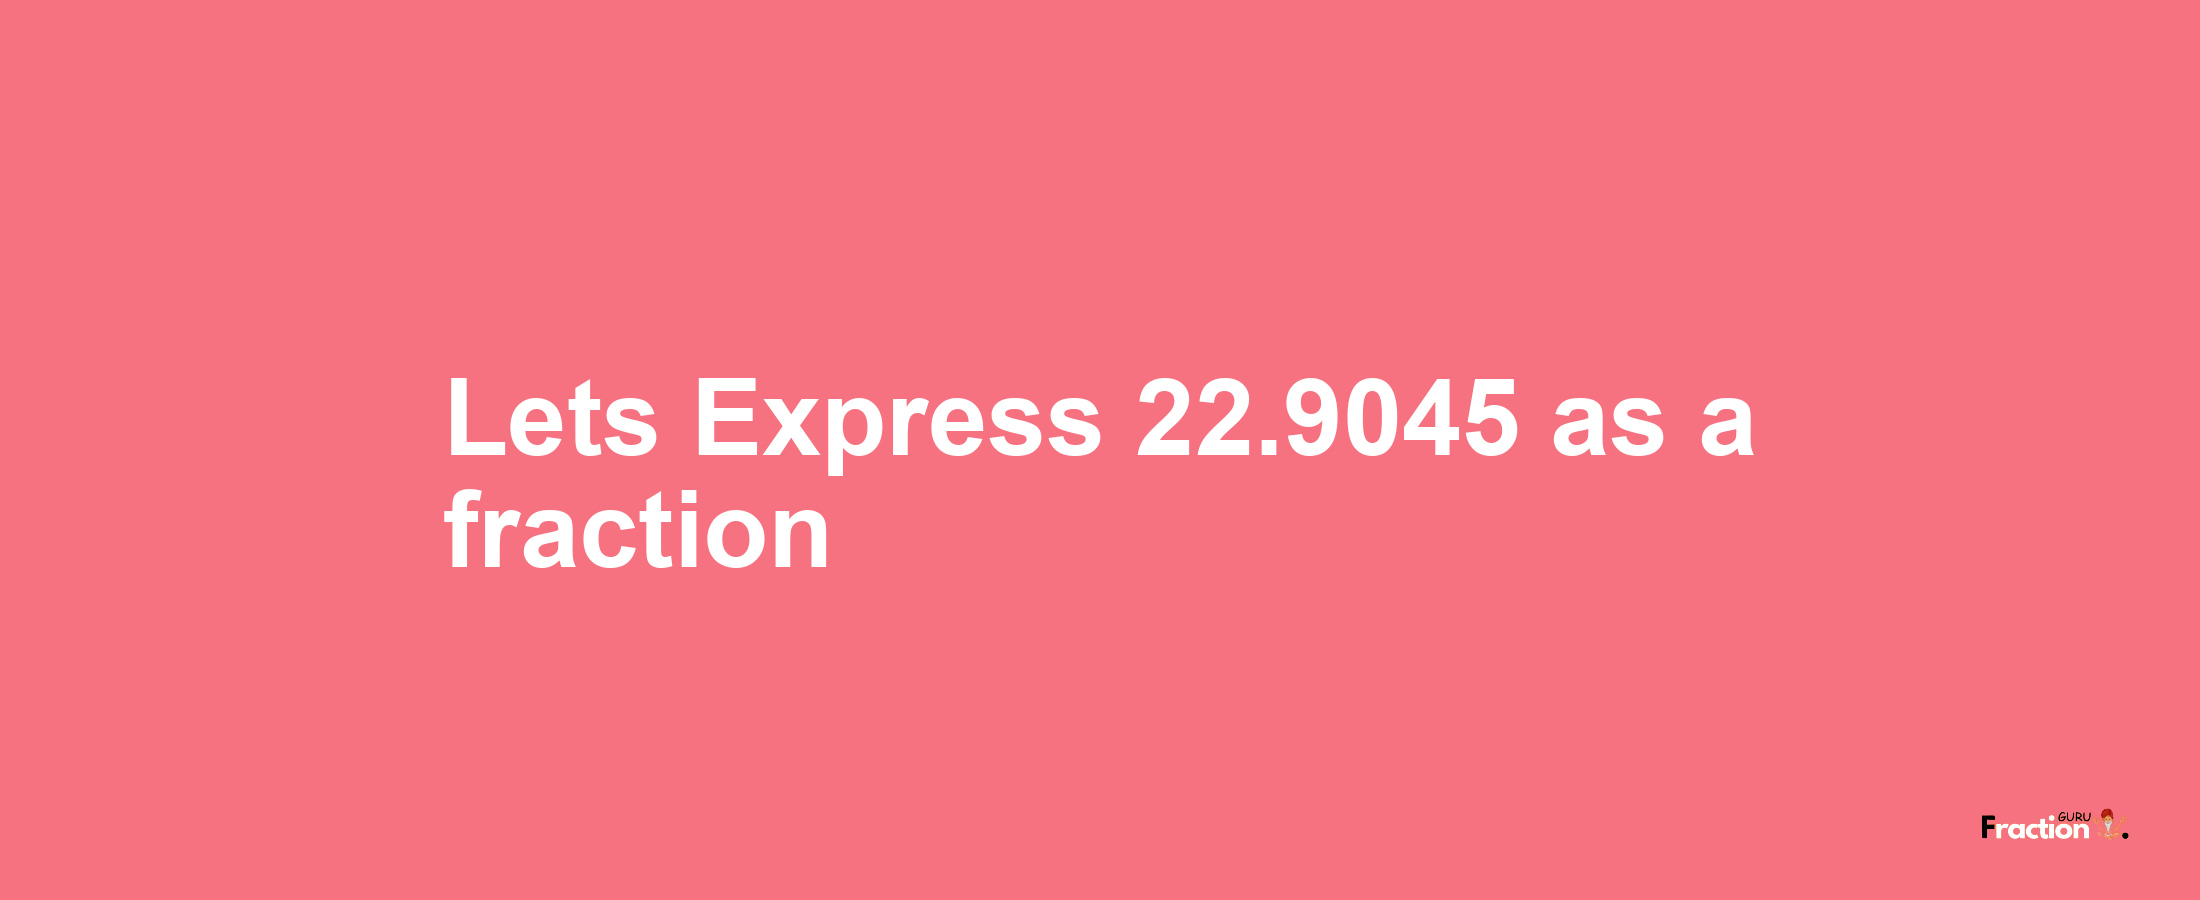 Lets Express 22.9045 as afraction